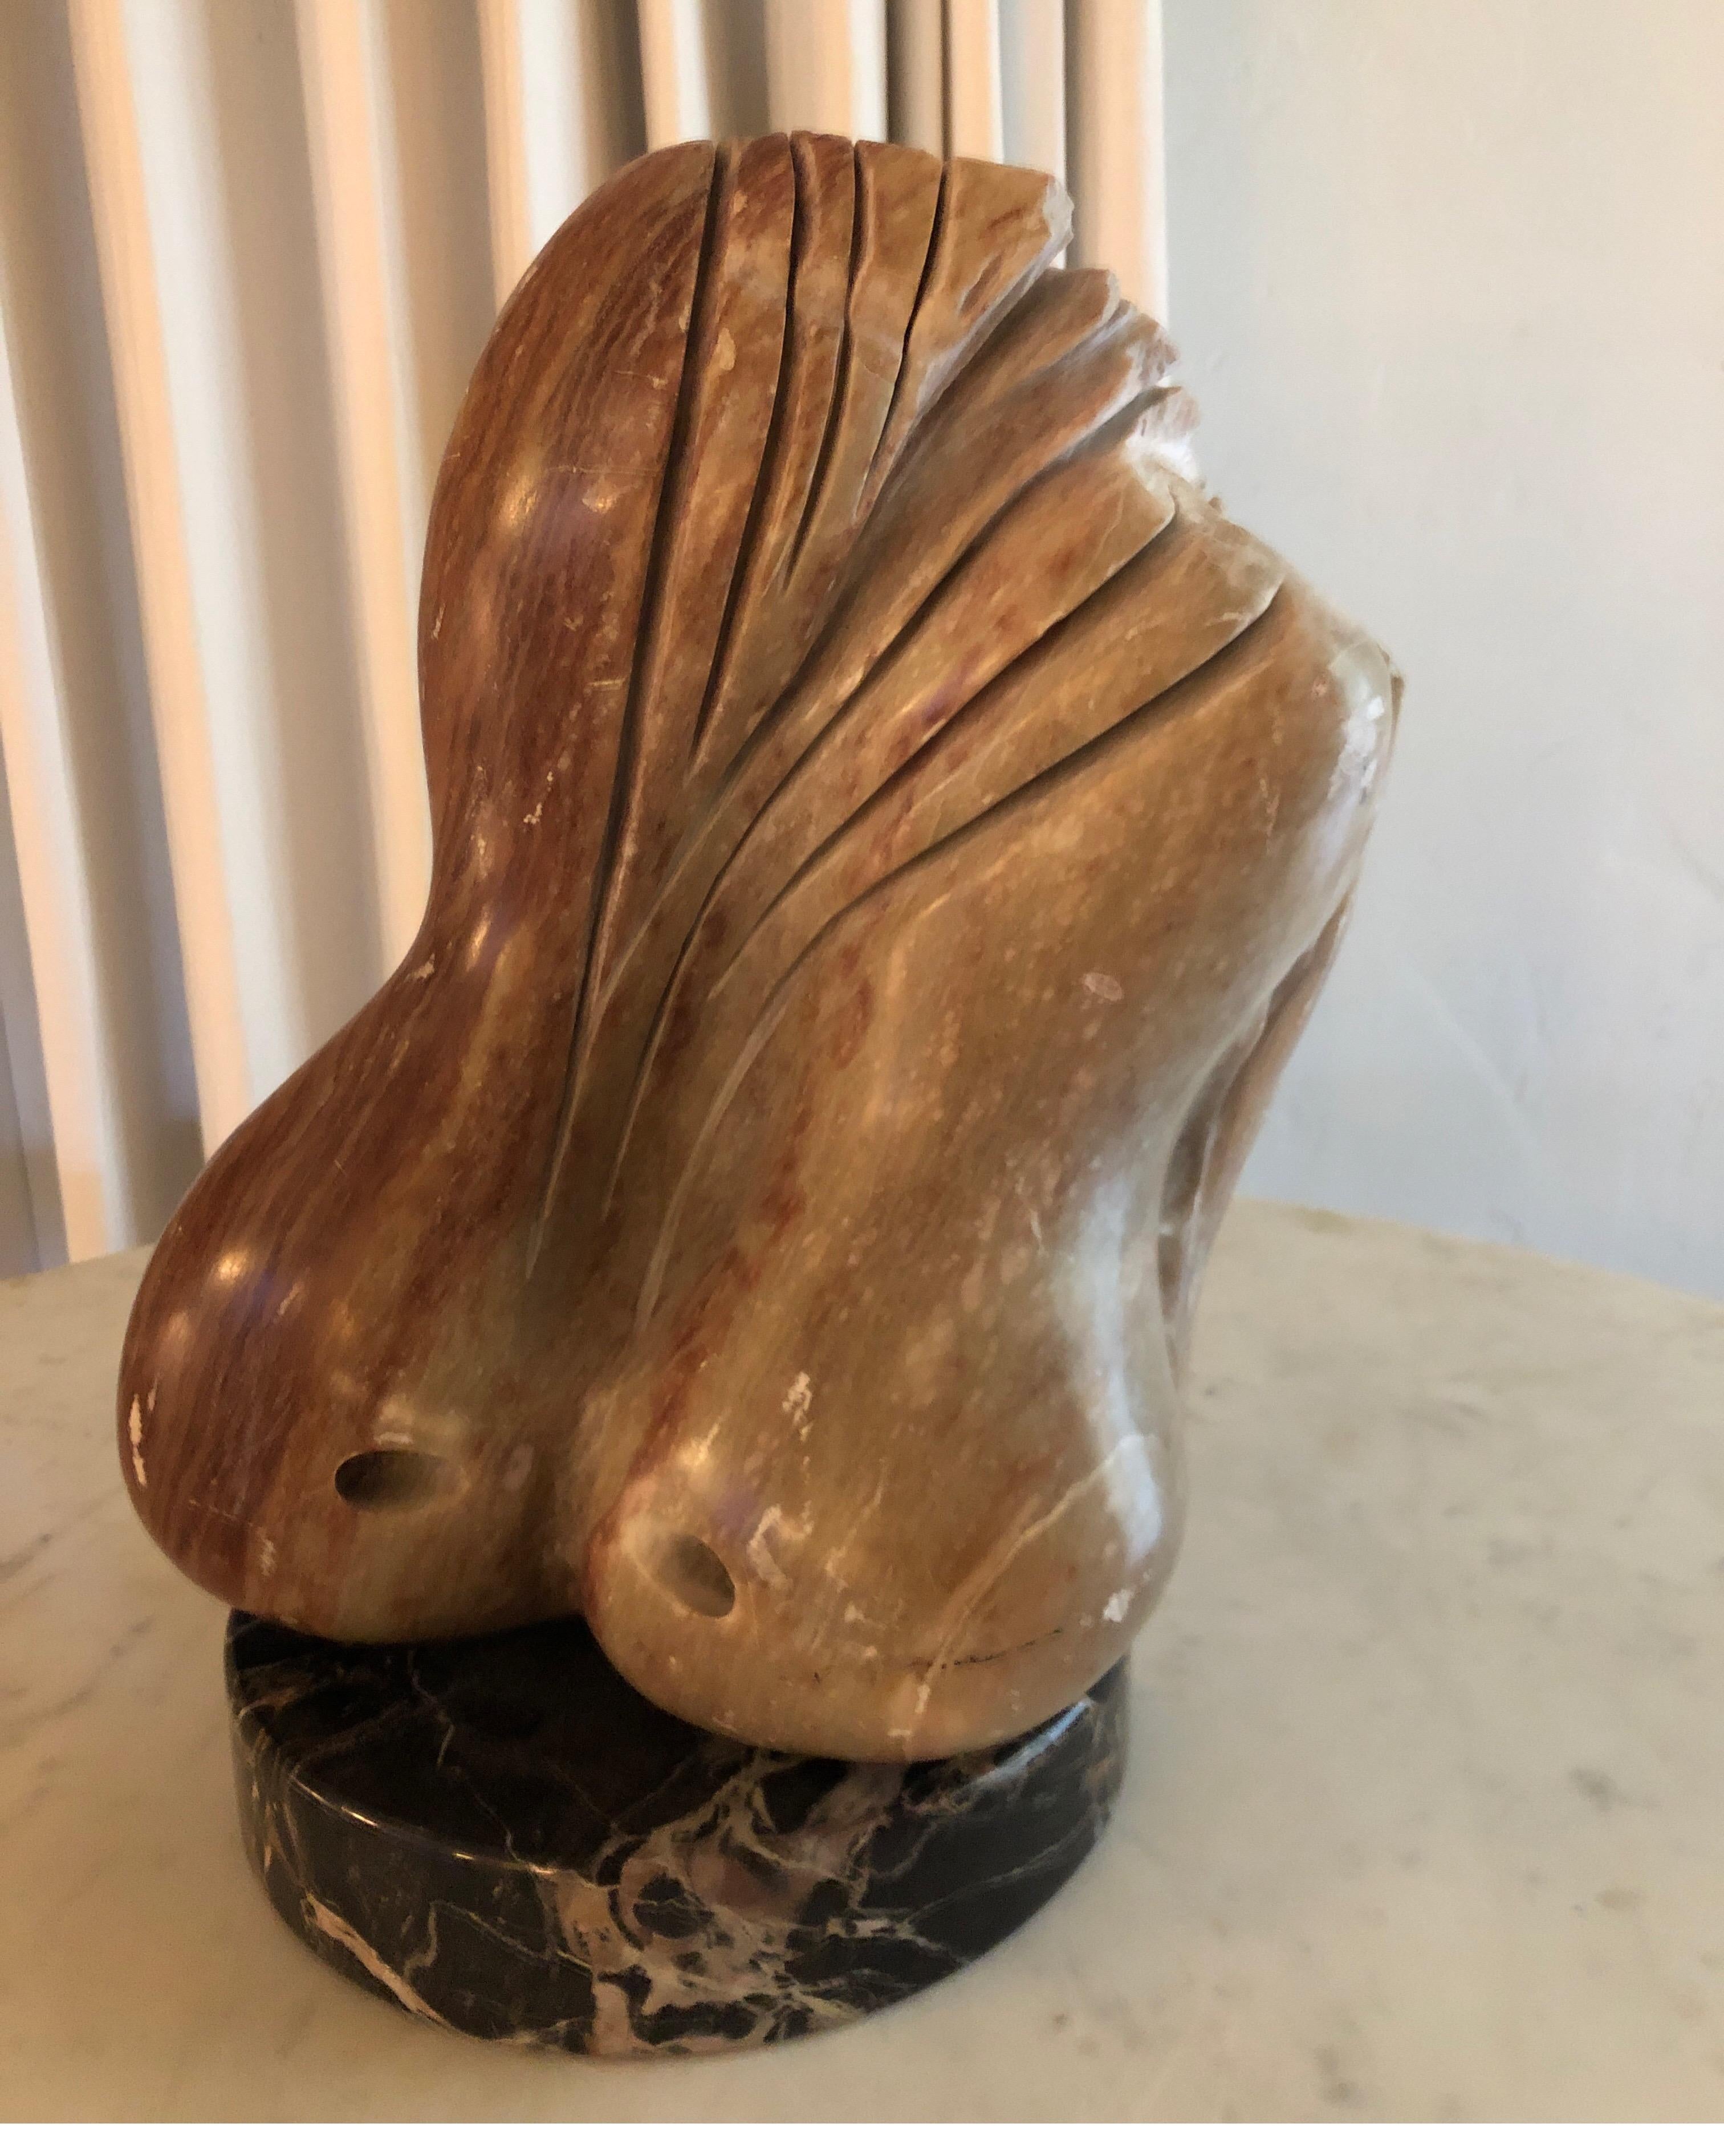 20th Century Yehuda Dodd Roth Signed Stone Sculpture, 1980s For Sale